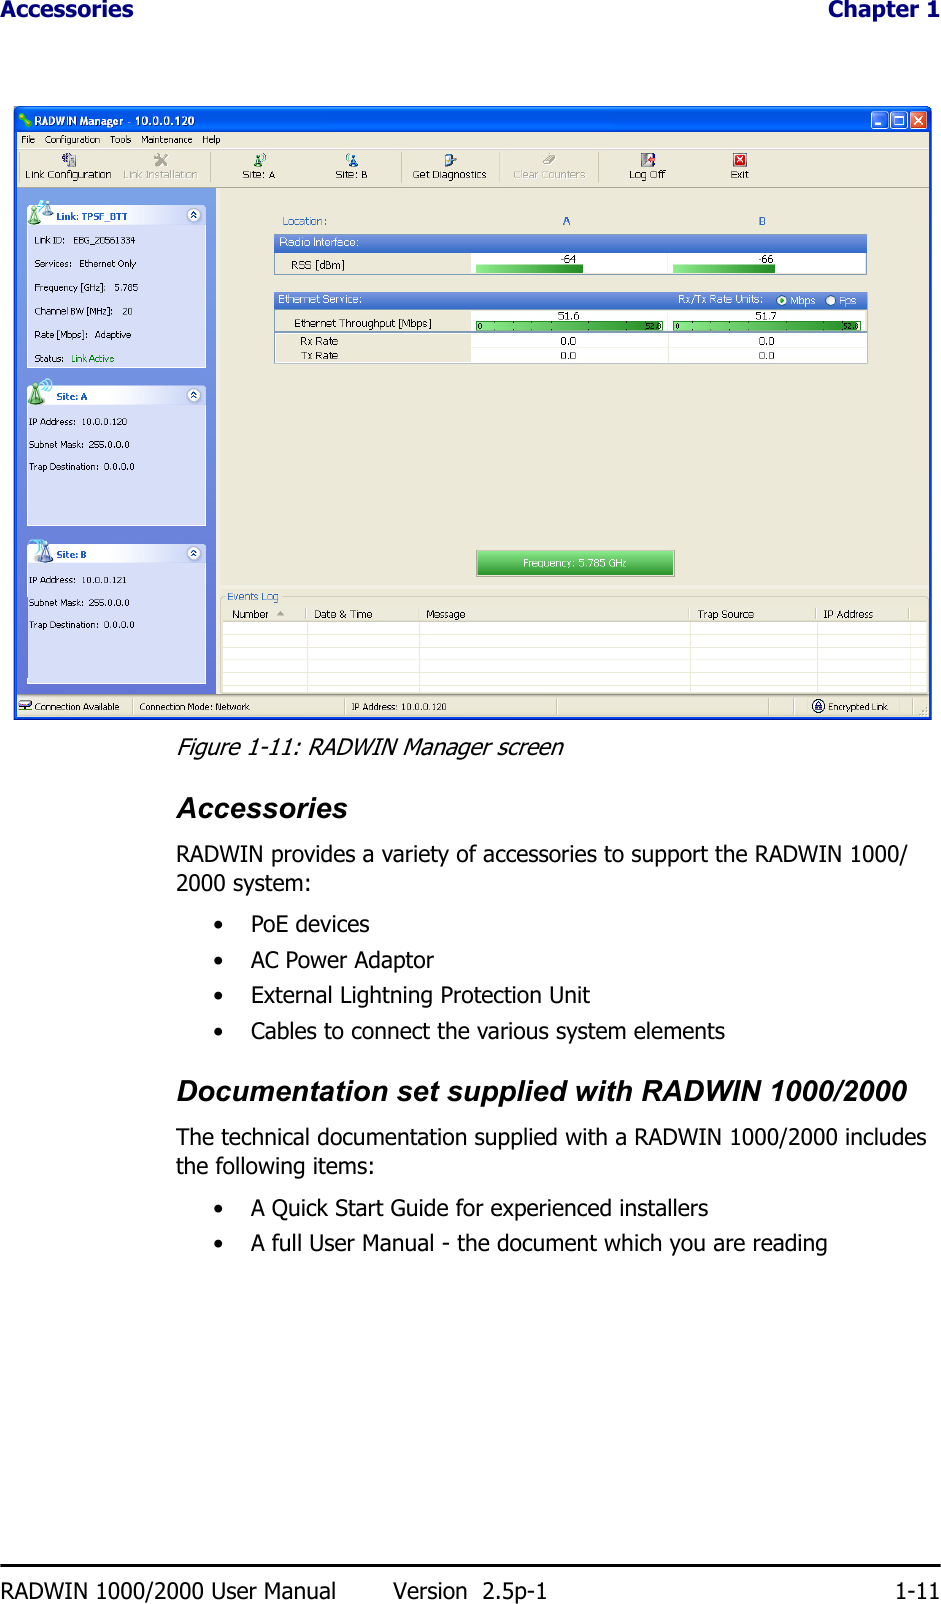 Accessories  Chapter 1RADWIN 1000/2000 User Manual Version  2.5p-1 1-11Figure 1-11: RADWIN Manager screenAccessoriesRADWIN provides a variety of accessories to support the RADWIN 1000/2000 system:•PoE devices•AC Power Adaptor• External Lightning Protection Unit• Cables to connect the various system elementsDocumentation set supplied with RADWIN 1000/2000The technical documentation supplied with a RADWIN 1000/2000 includes the following items:• A Quick Start Guide for experienced installers• A full User Manual - the document which you are reading